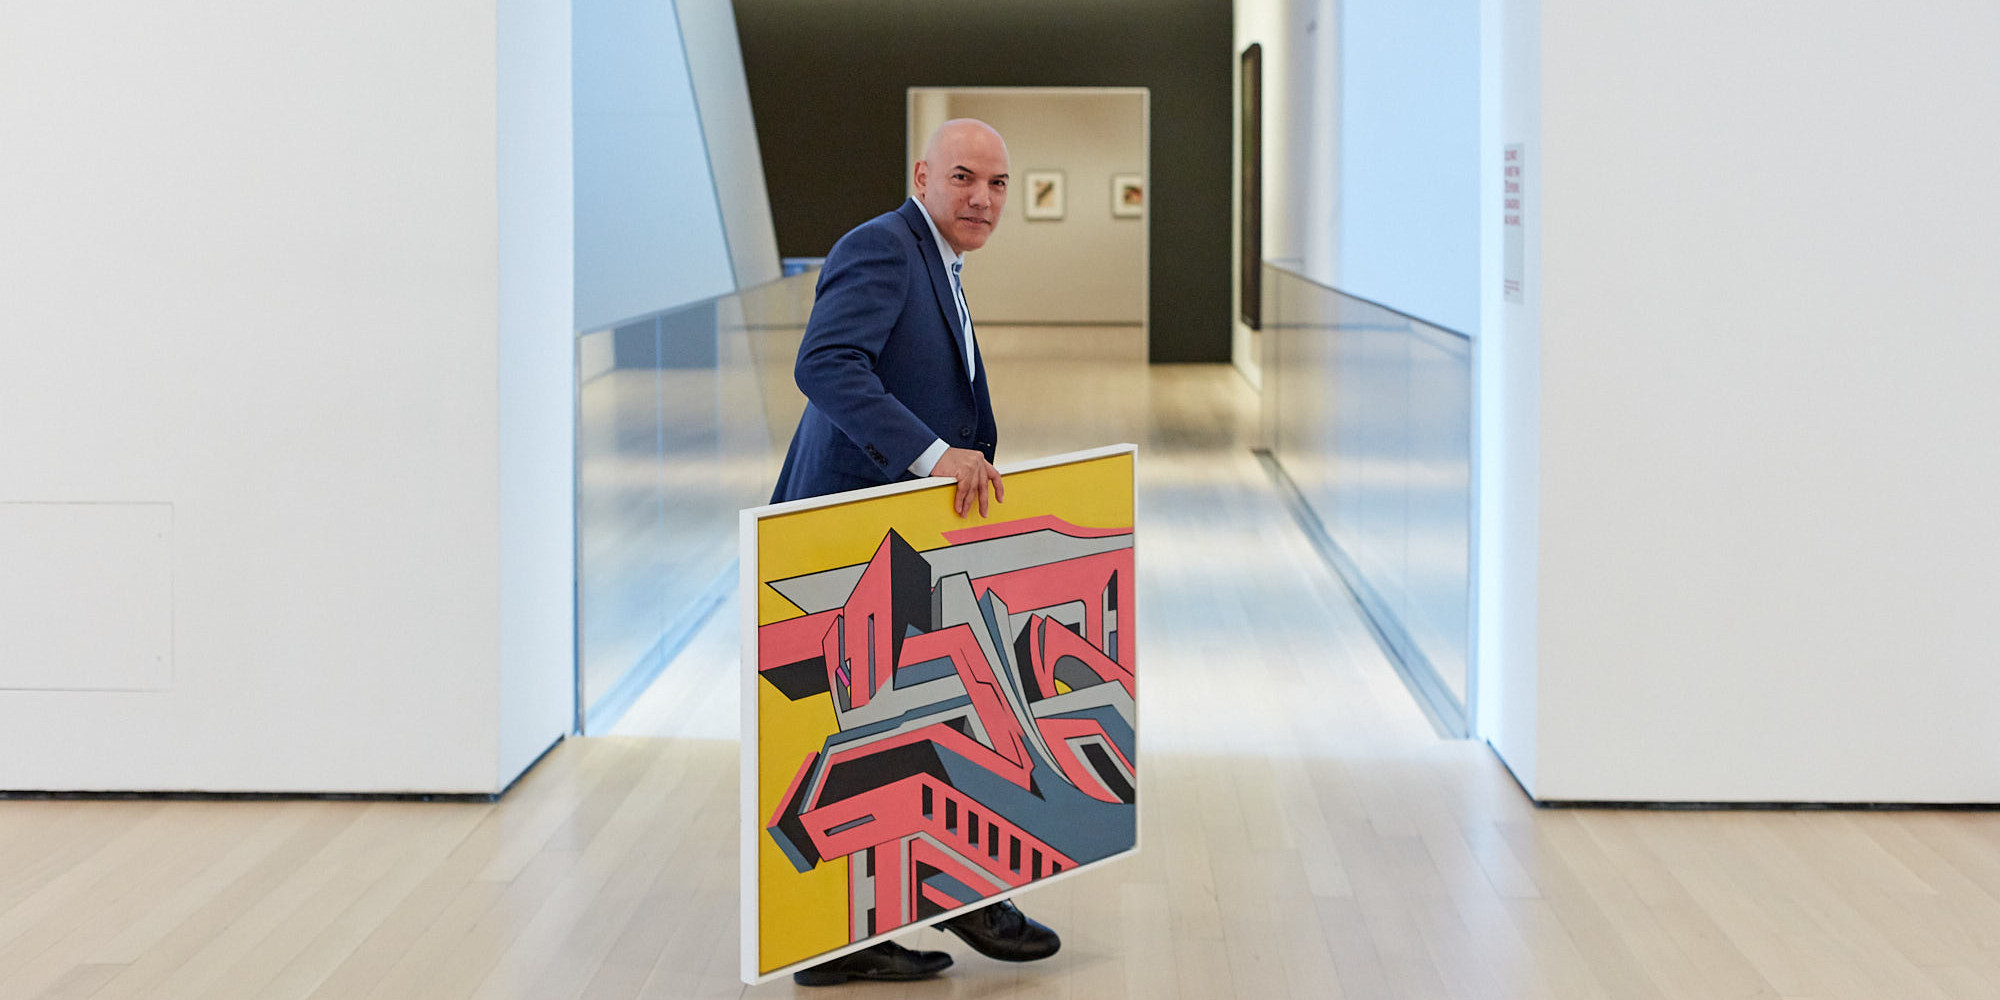 José Colon in the Museum galleries with his painting. Photo: Beatriz Meseguer/onwhitewall.com